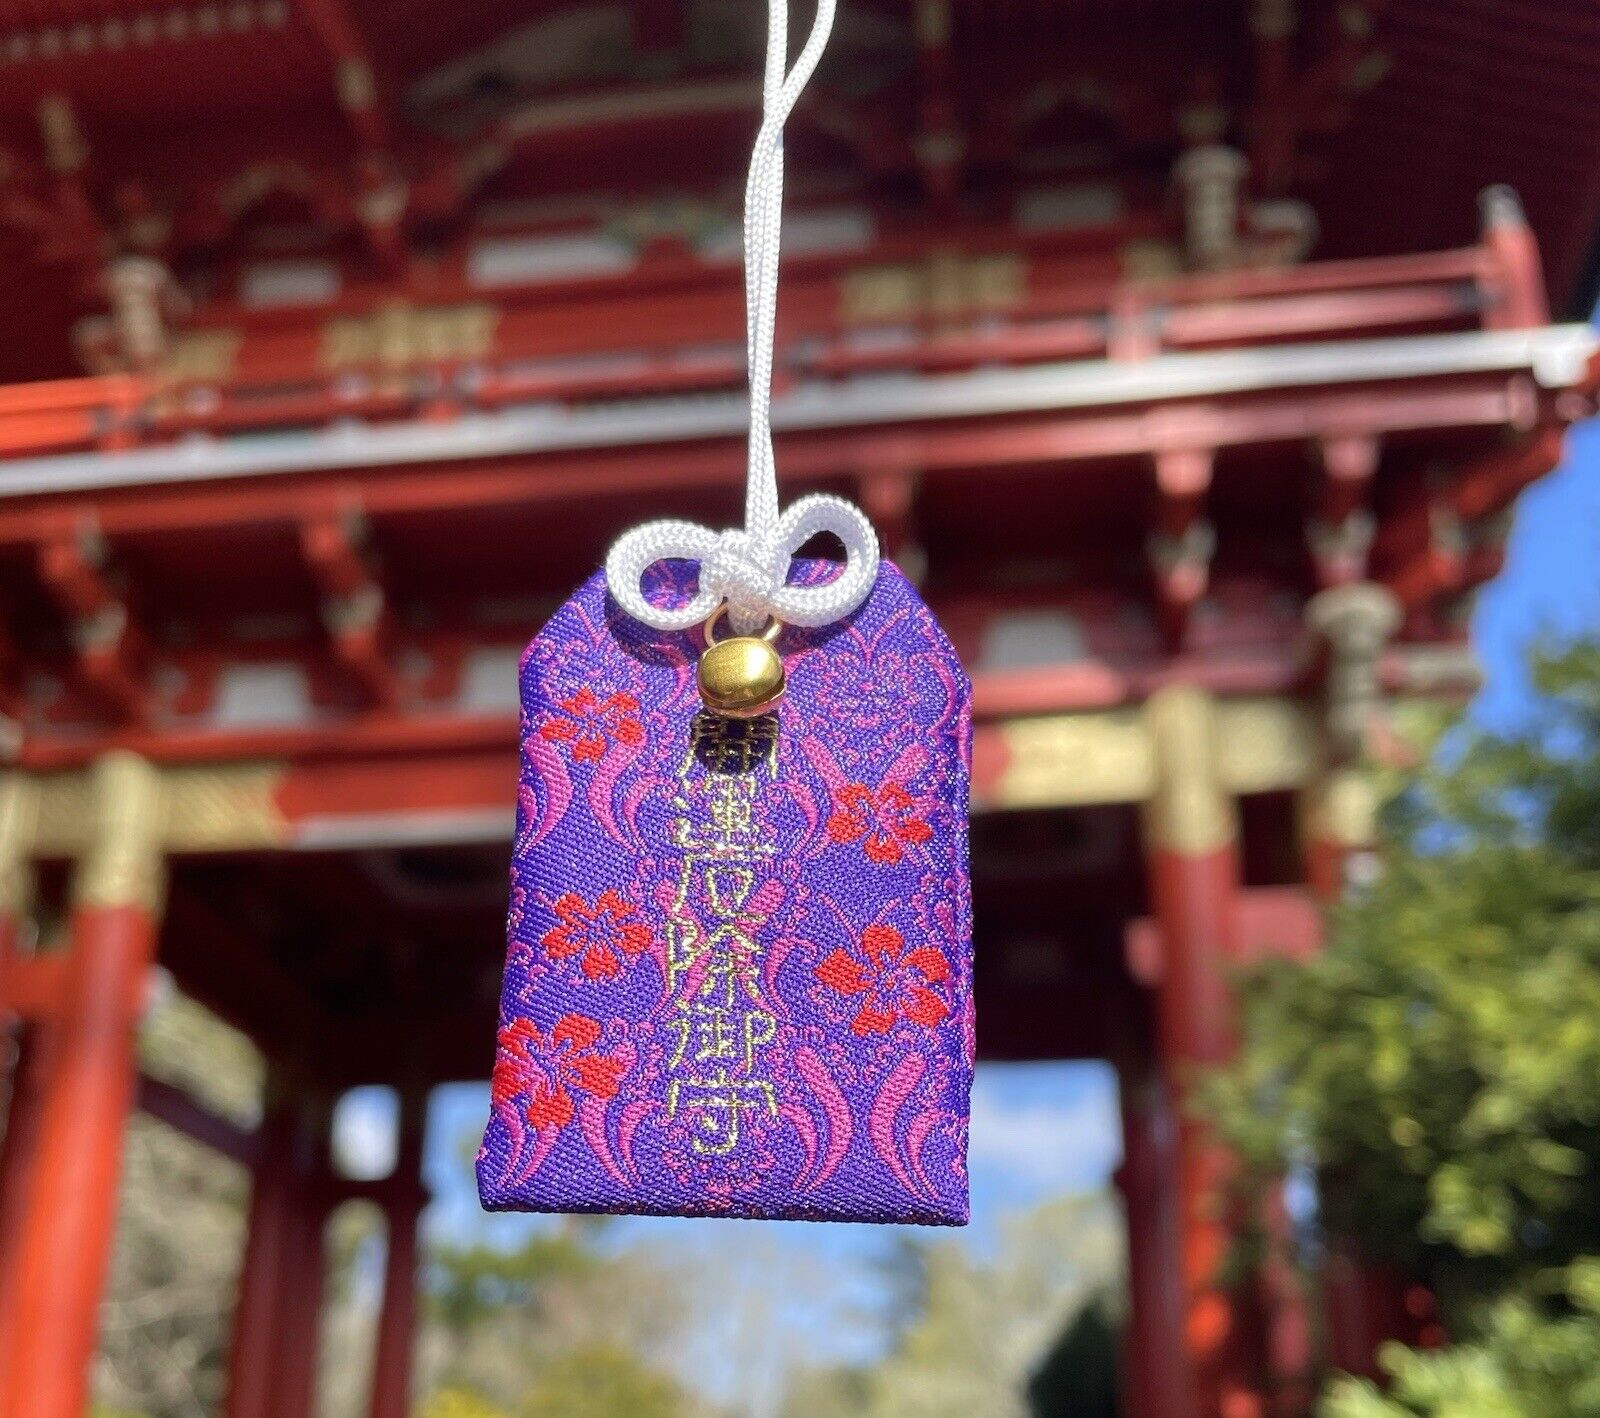 Japanese Omamori Charm For Fortune and Protection from Bad Luck - New Talisman -